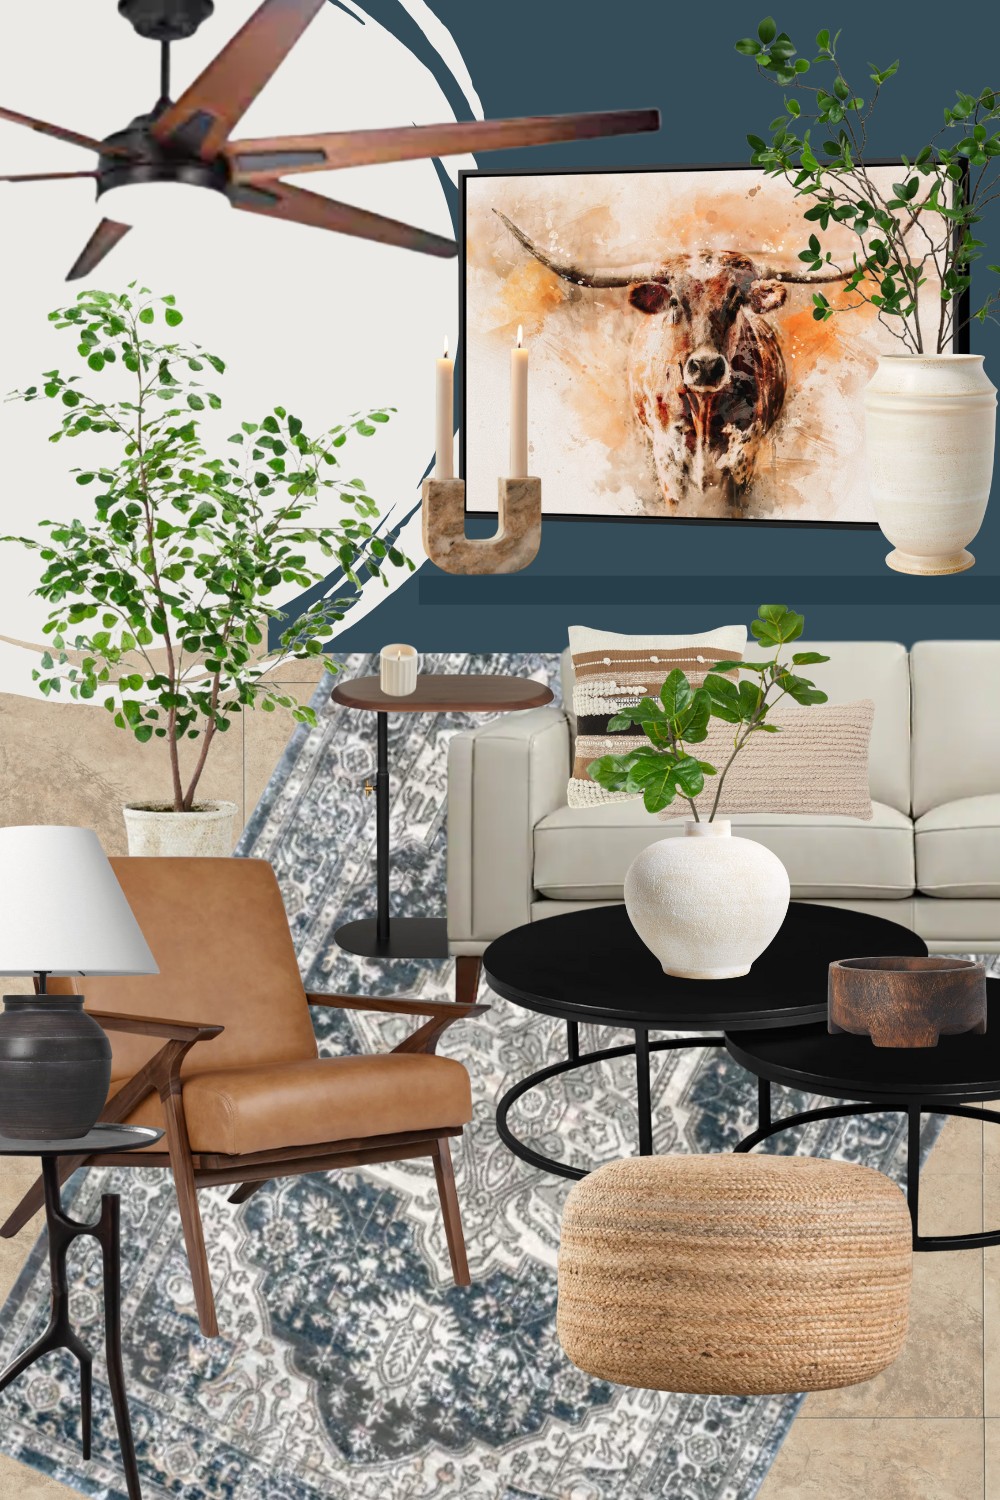 design board for a living room featuring navy blue accent wall, plants, white leather sofa, caramel leather chair, round coffee tables, blue rug, light flooring, lamps and jute pouff as well as watercolor long horn print